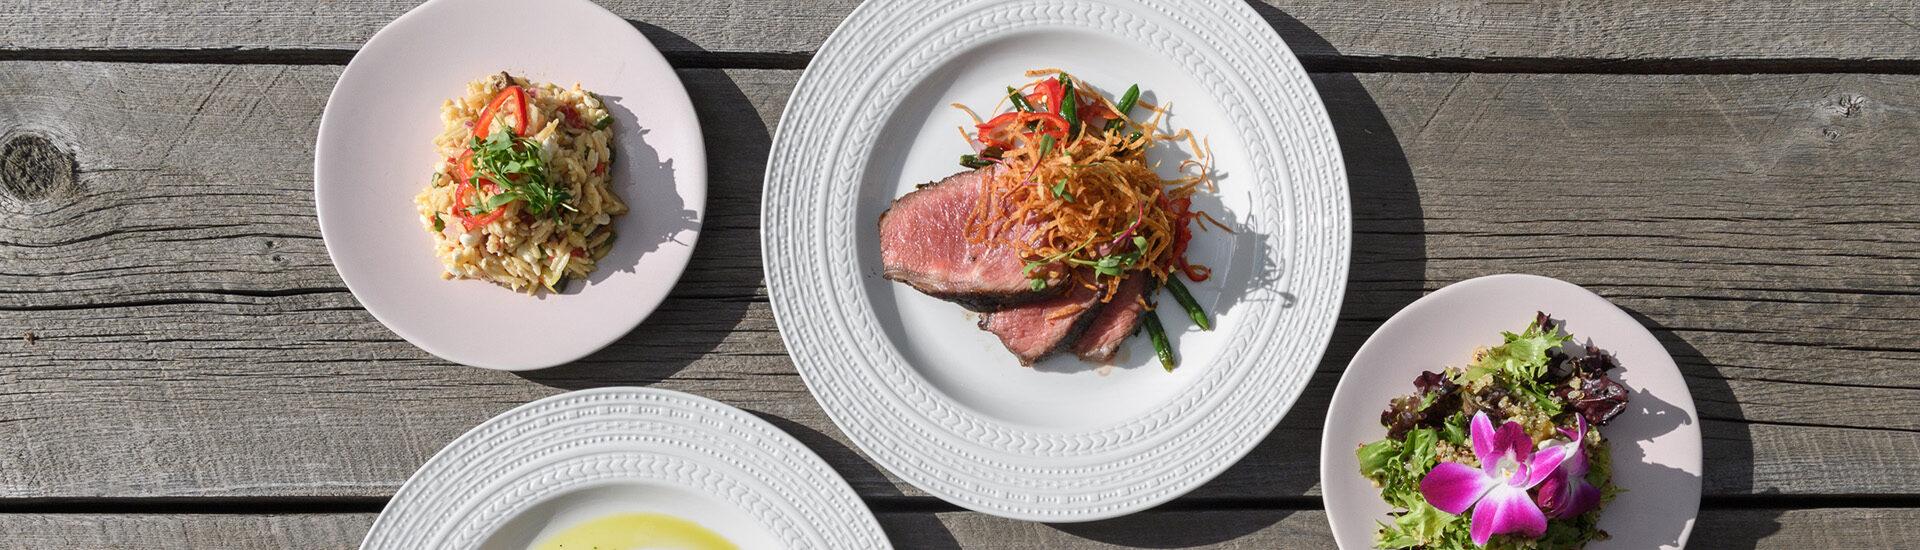 Overhead of multiple plates. A white dinner plate with sliced steak, a small pink plate with orzo salad, a small grey plate salad on a grey wood background